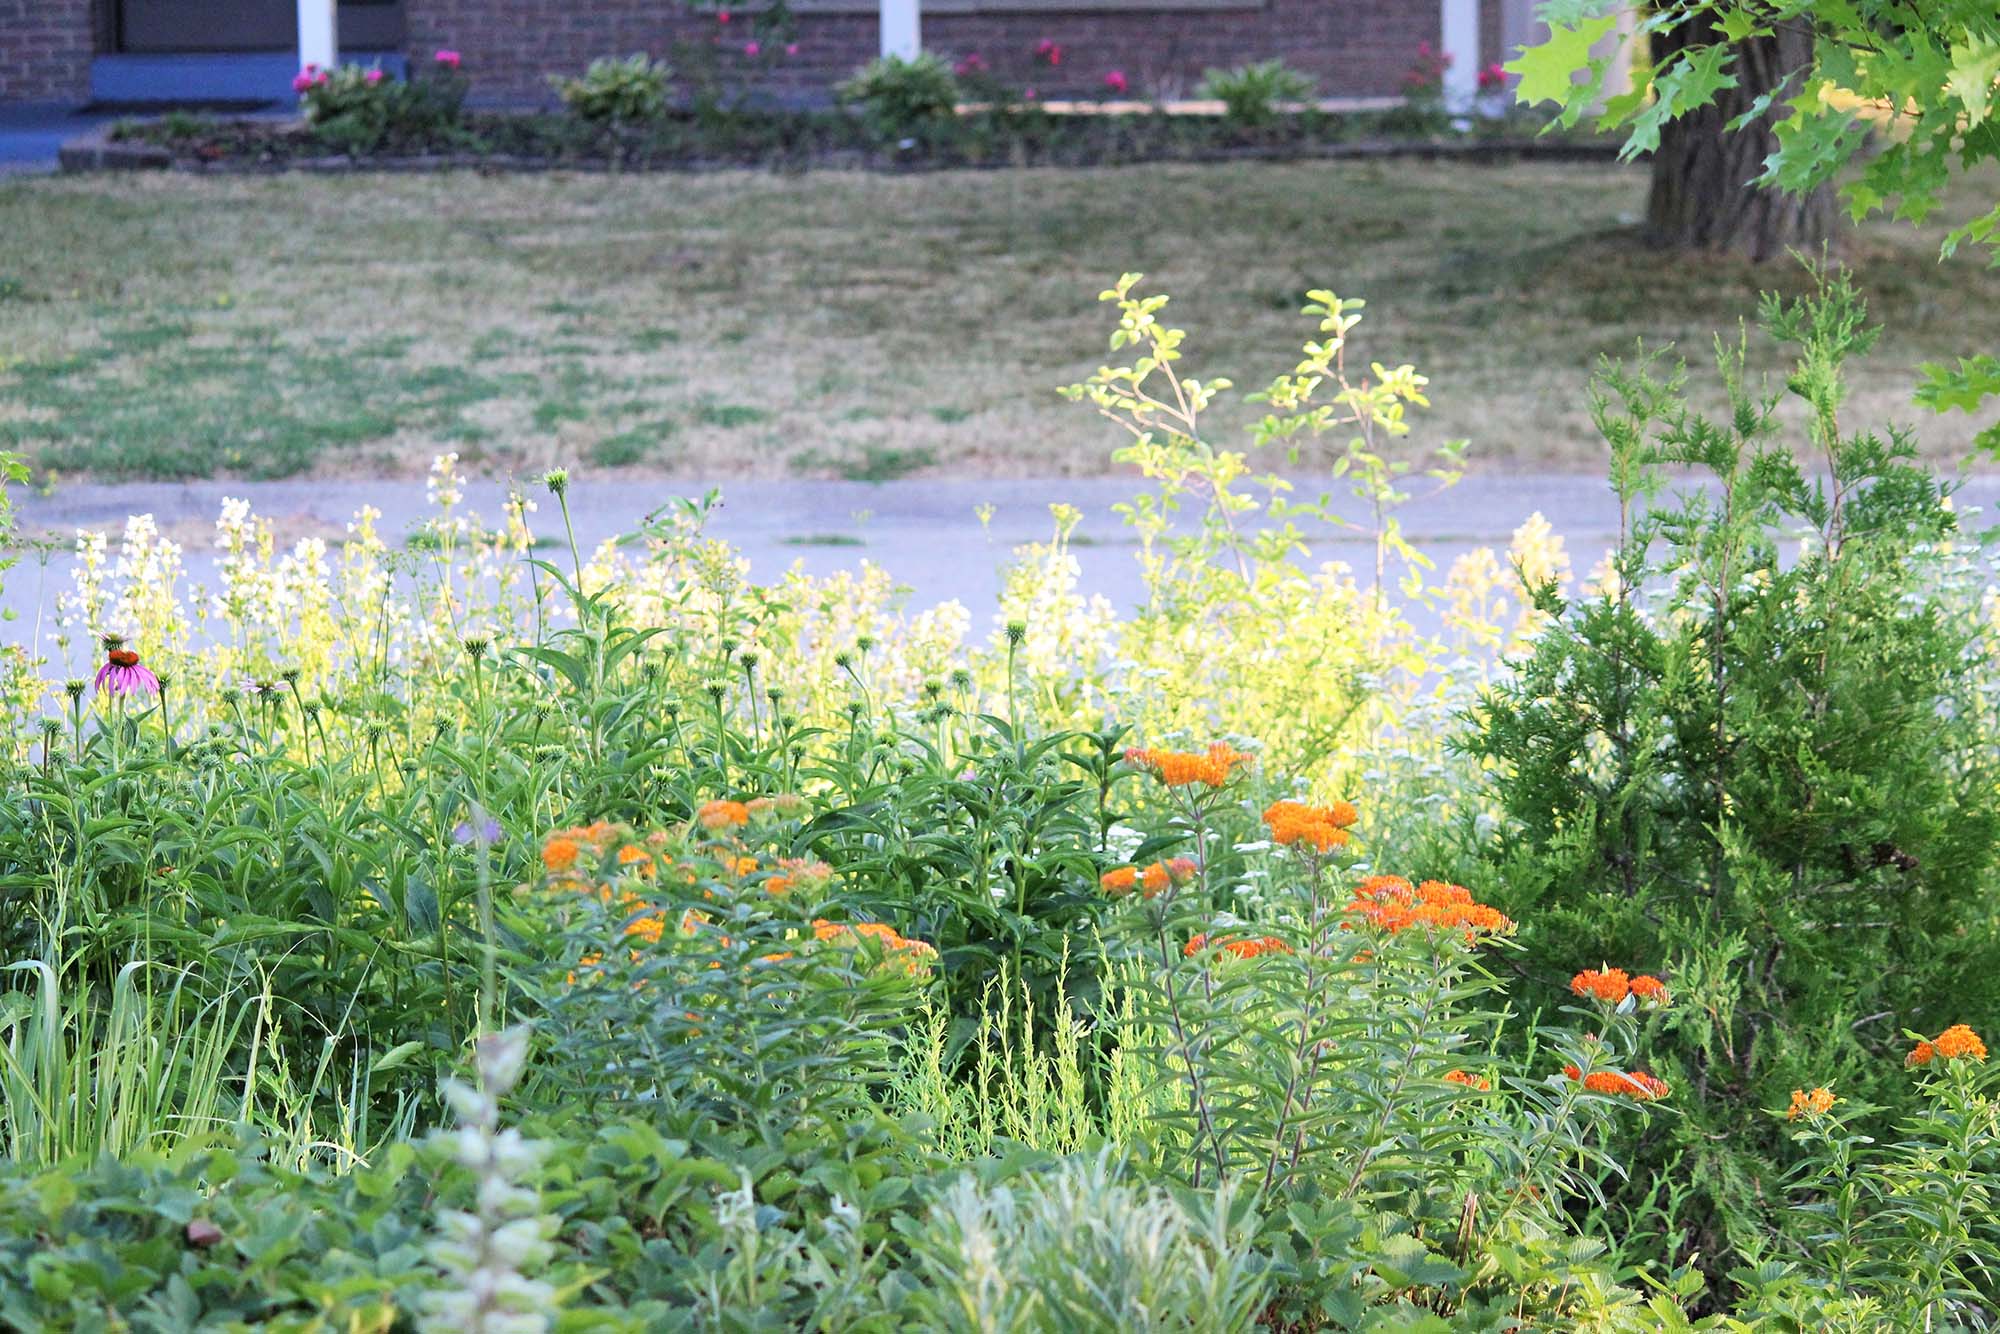 Foreground: a lush garden with milkweed, echinacea and other plants. Background, a dry, yellowed turf lawn.